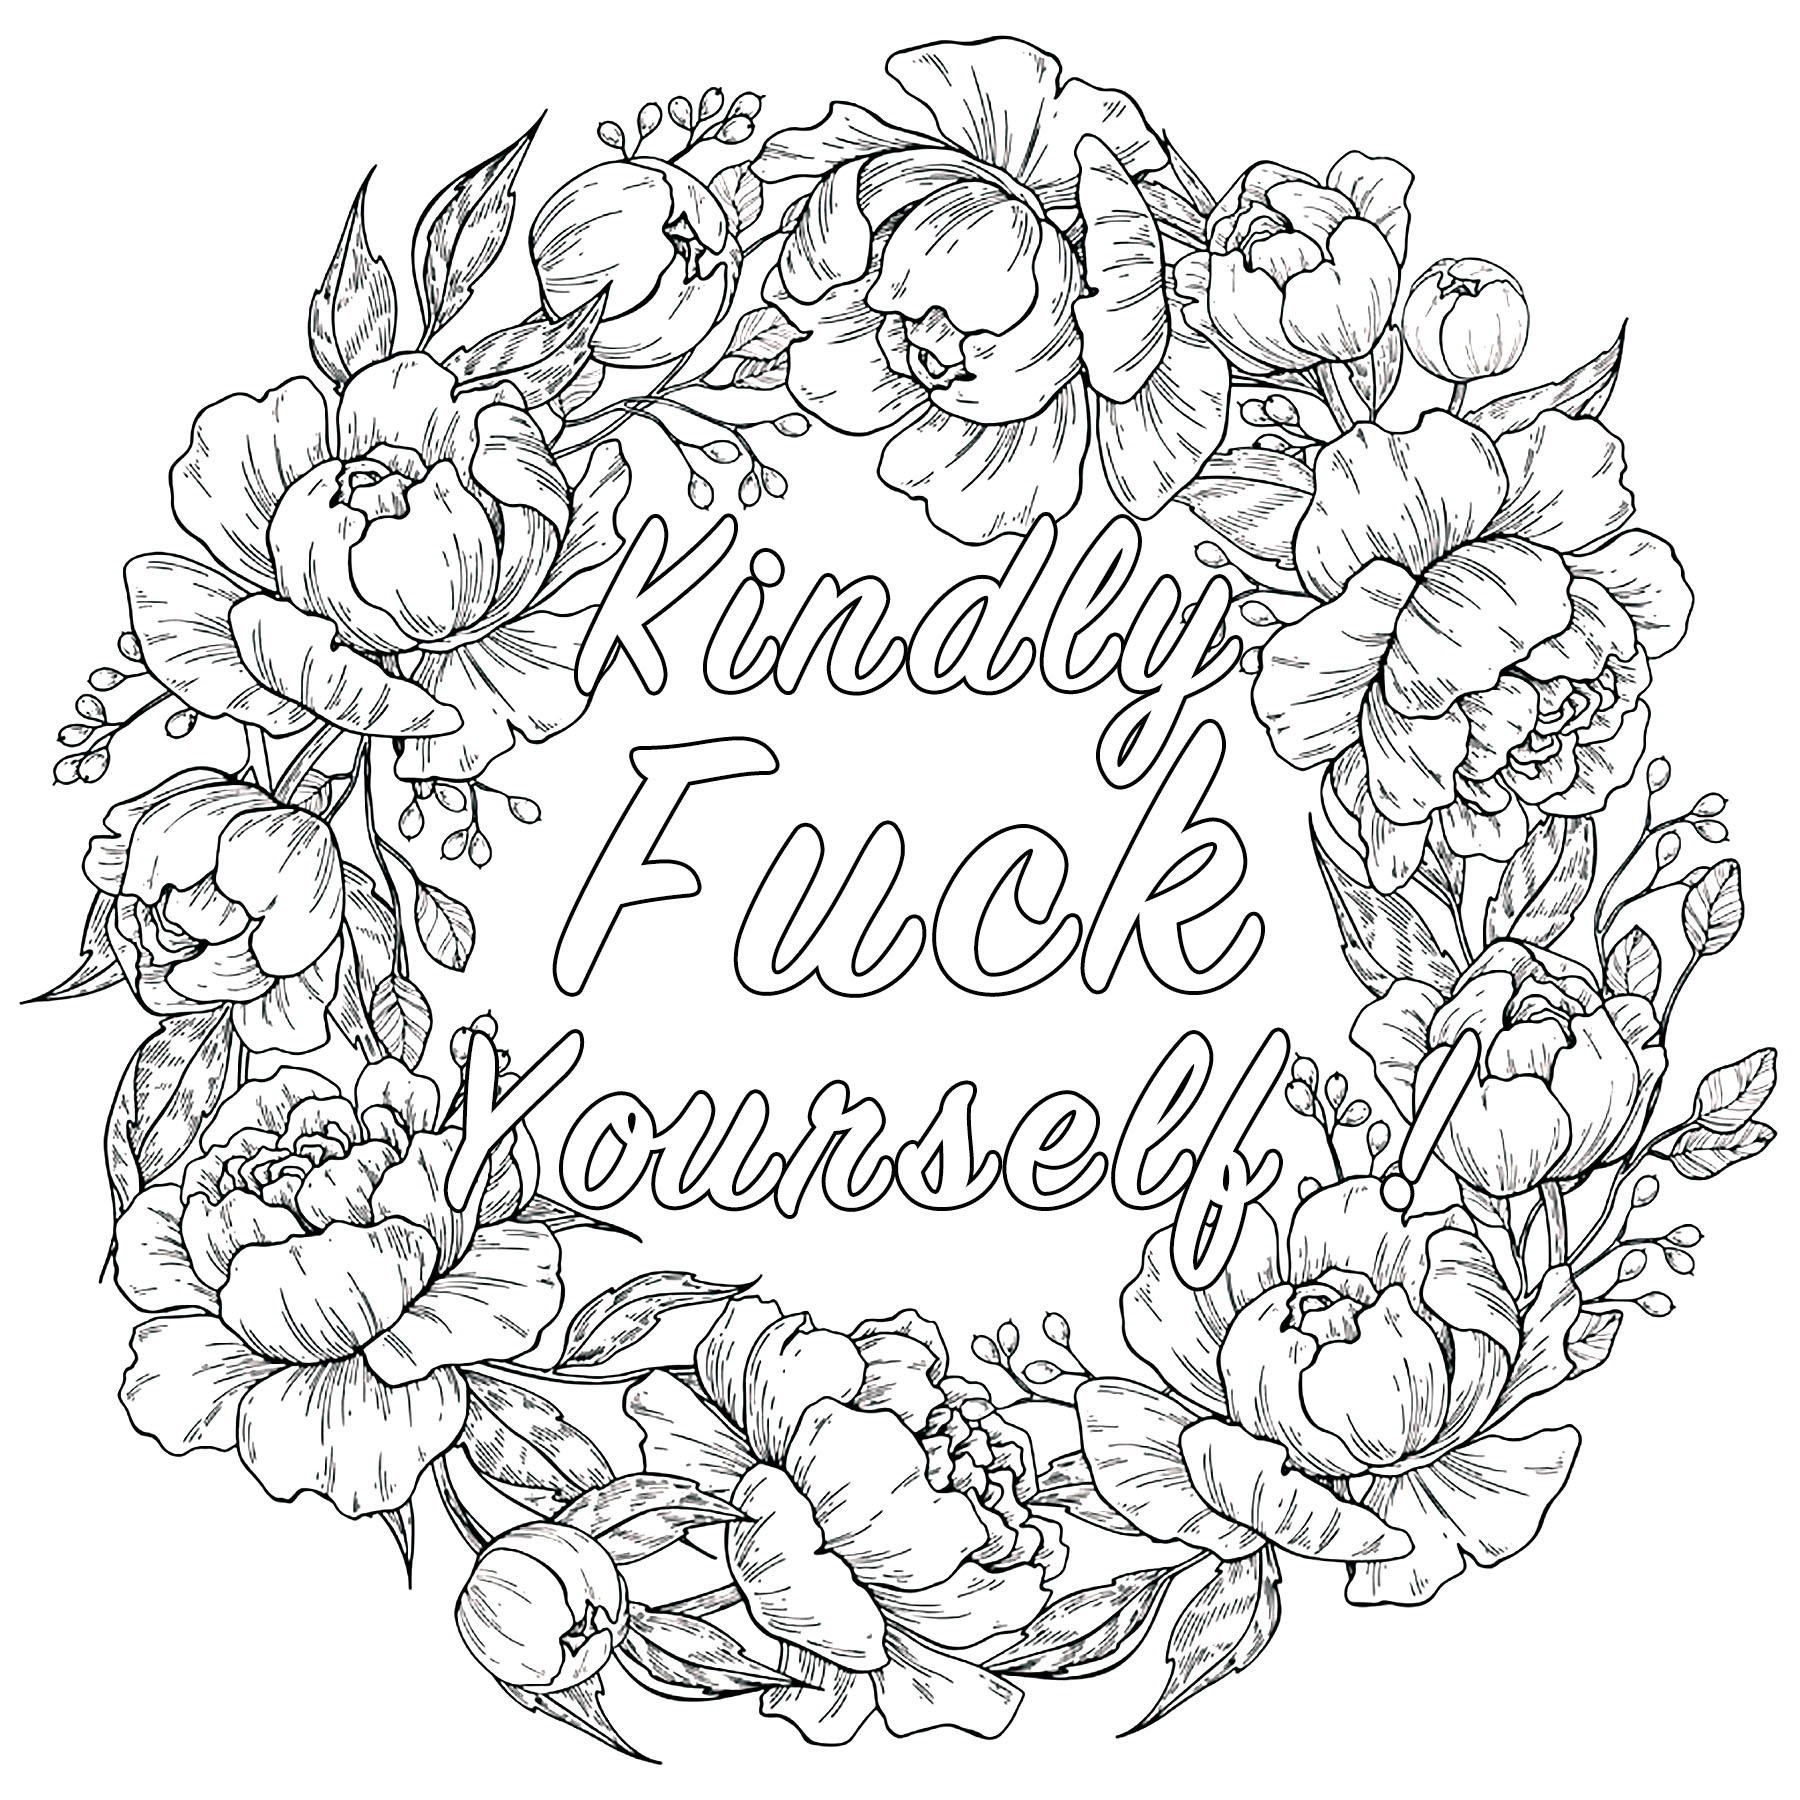 Kindly Fuck Yourself Swear word coloring page - Swear word Adult Coloring  Pages